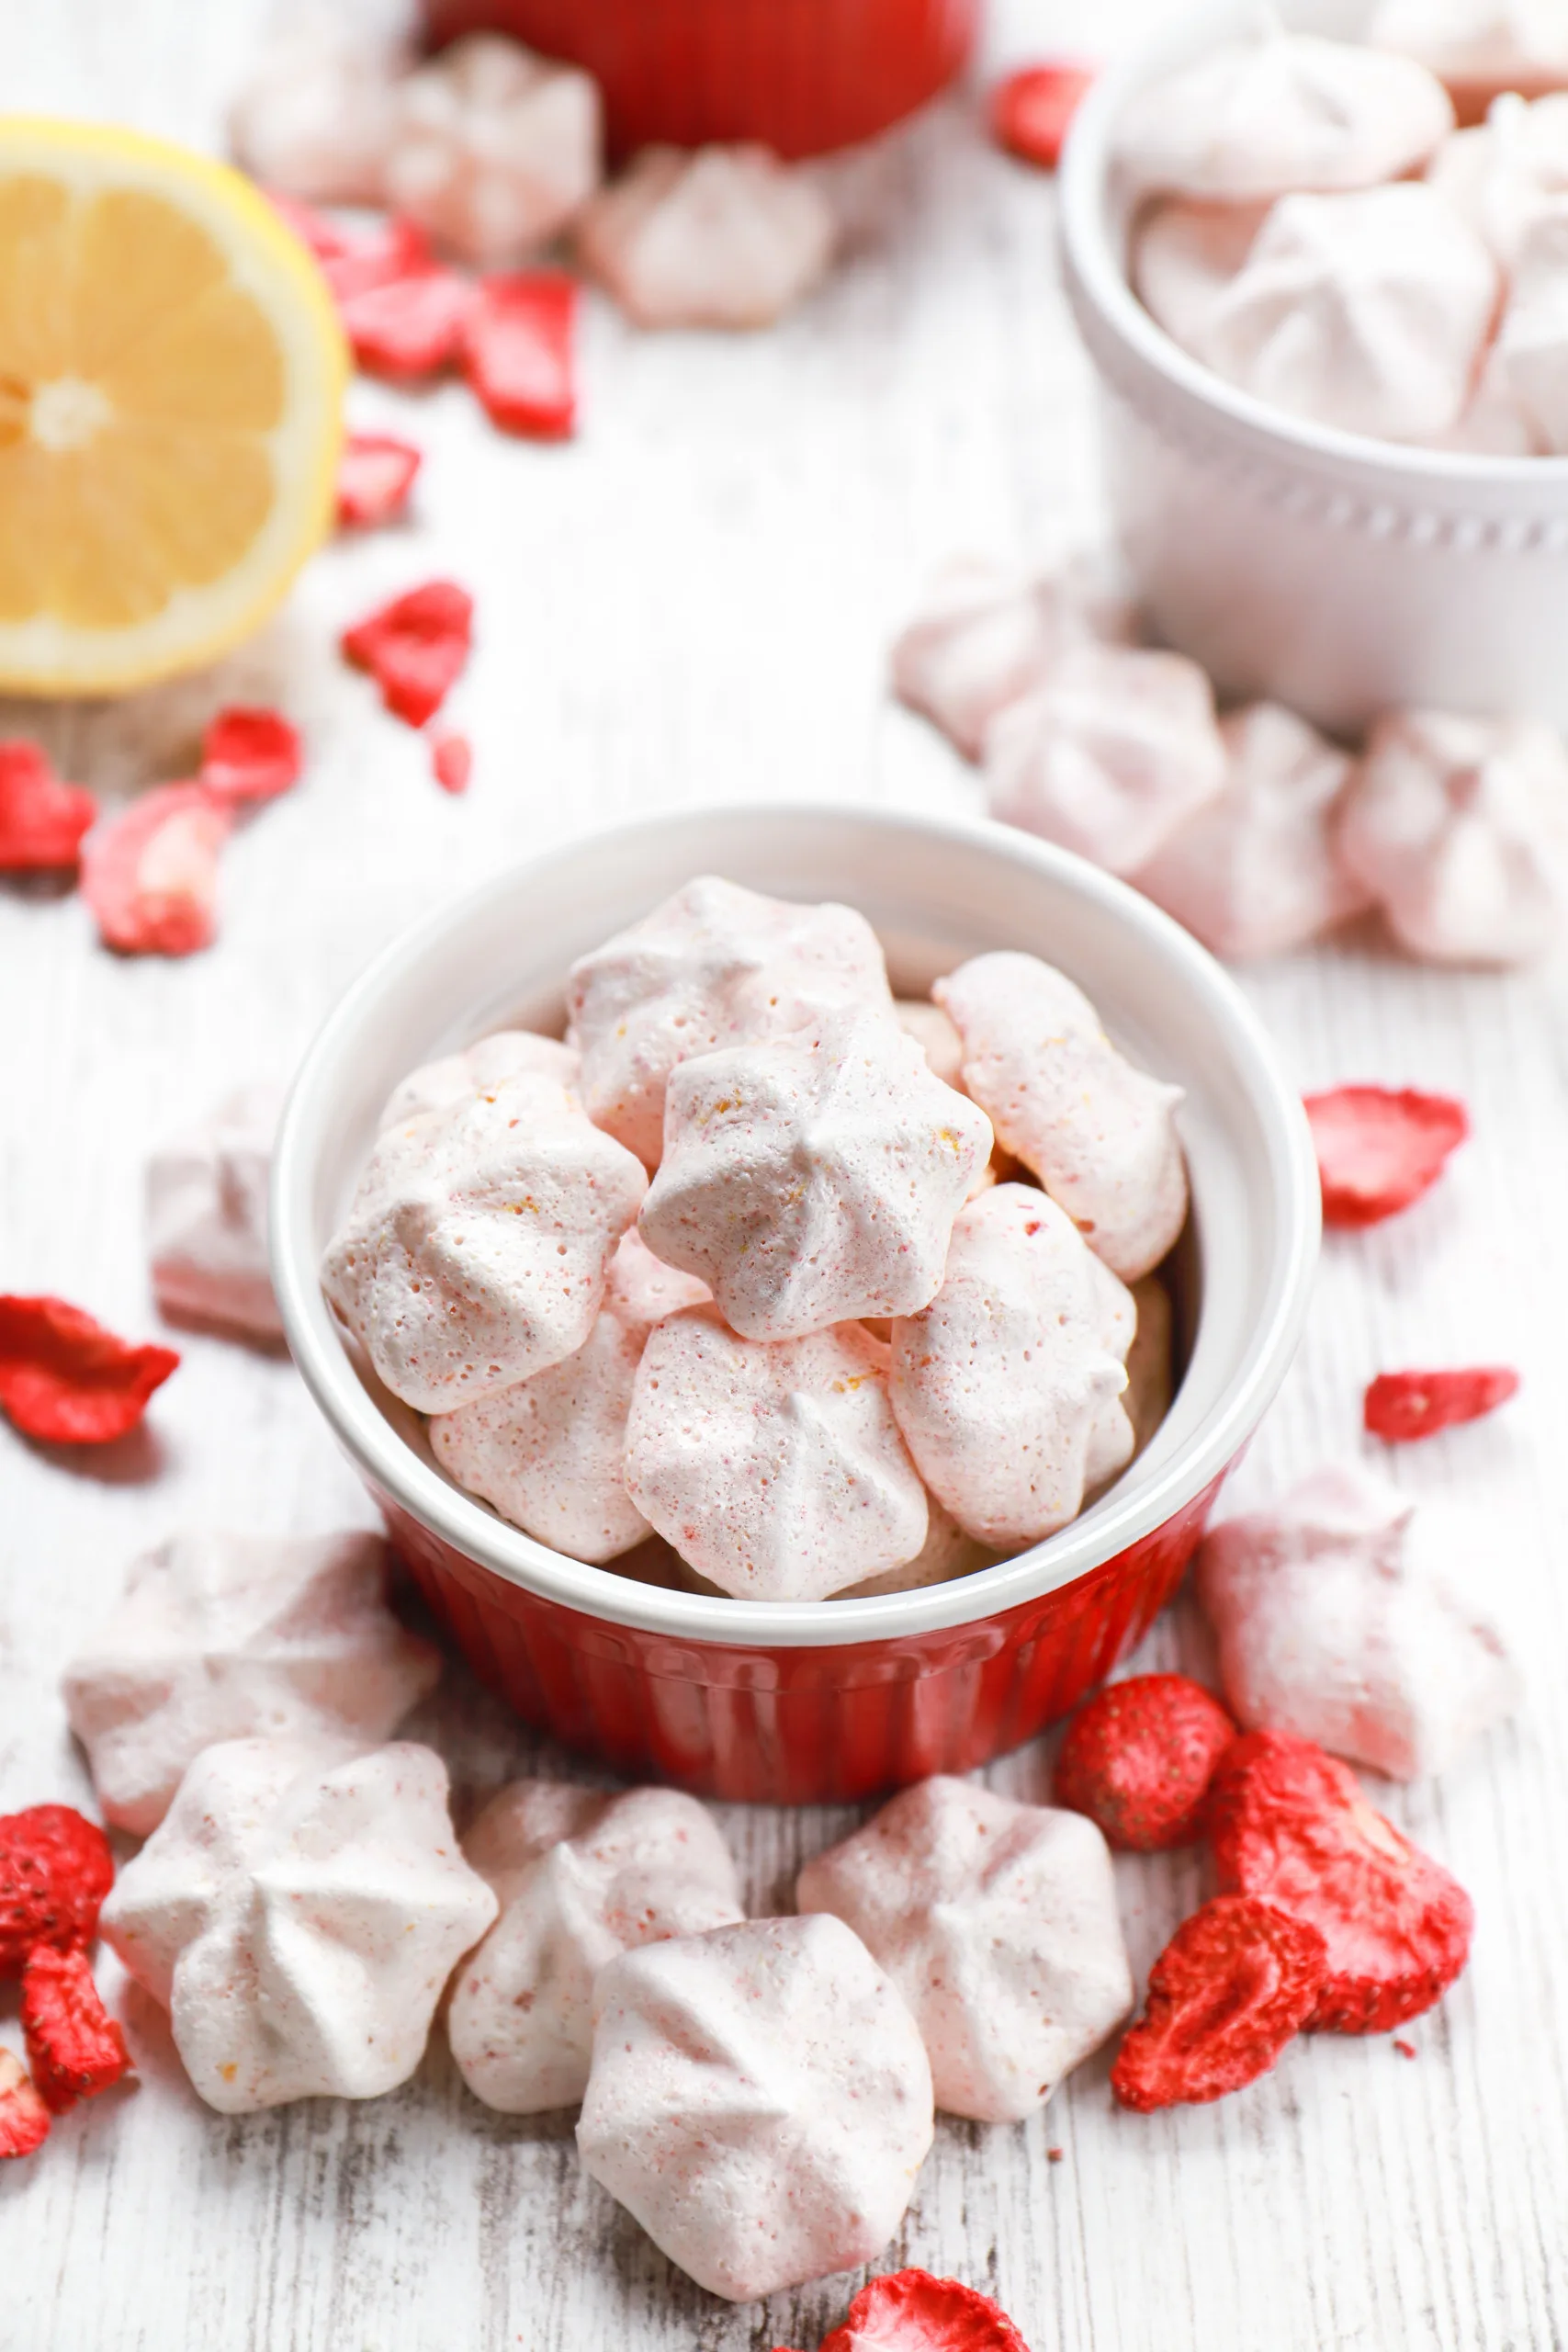 Mini strawberry lemon meringues in small bowls surrounding by a lemon half and more meringues and freeze-dried strawberries.